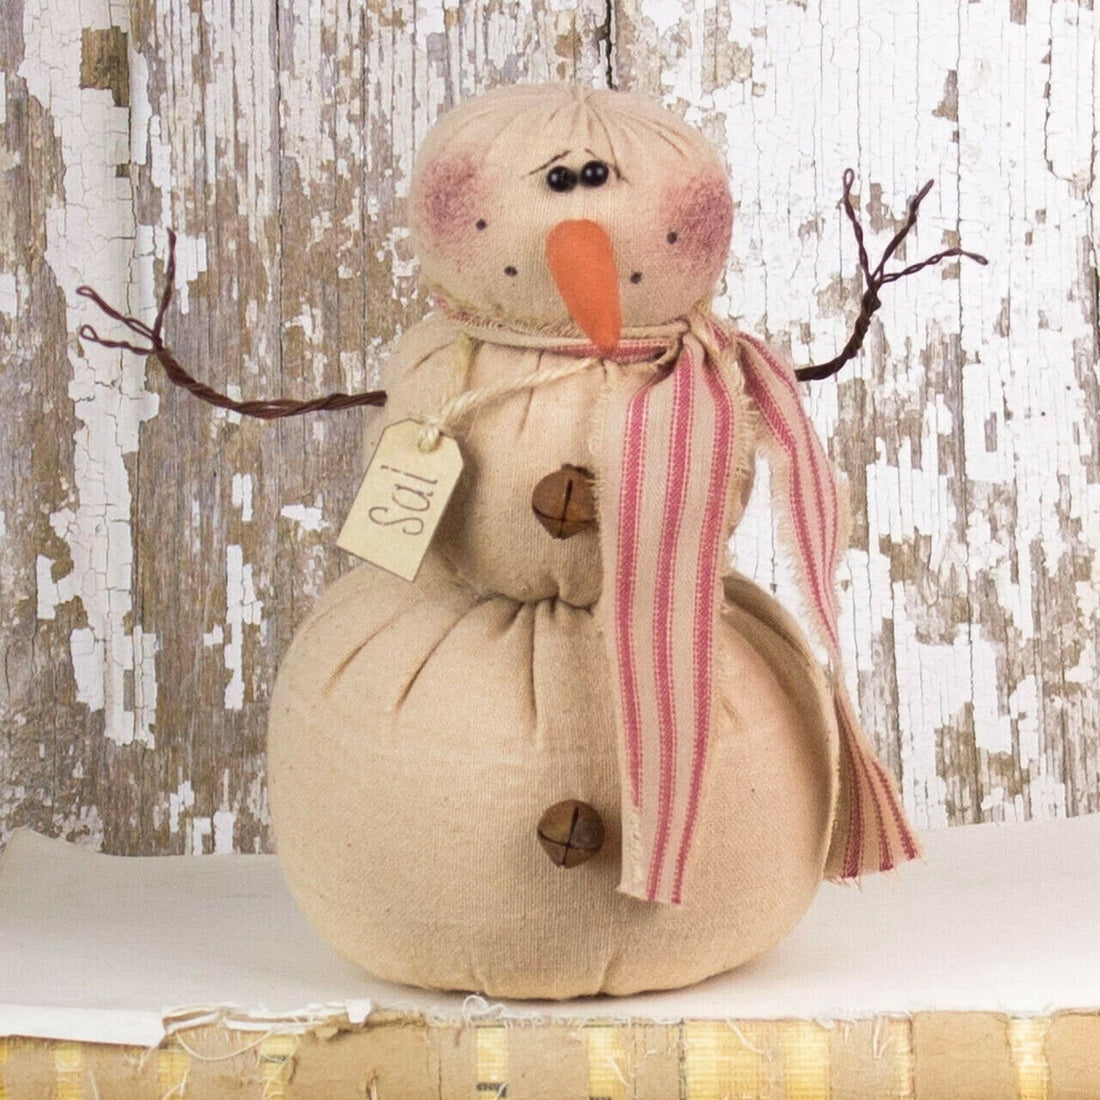 Honey and Me Christmas Sal the Snowman Doll C18451 - The Primitive Pineapple Collection